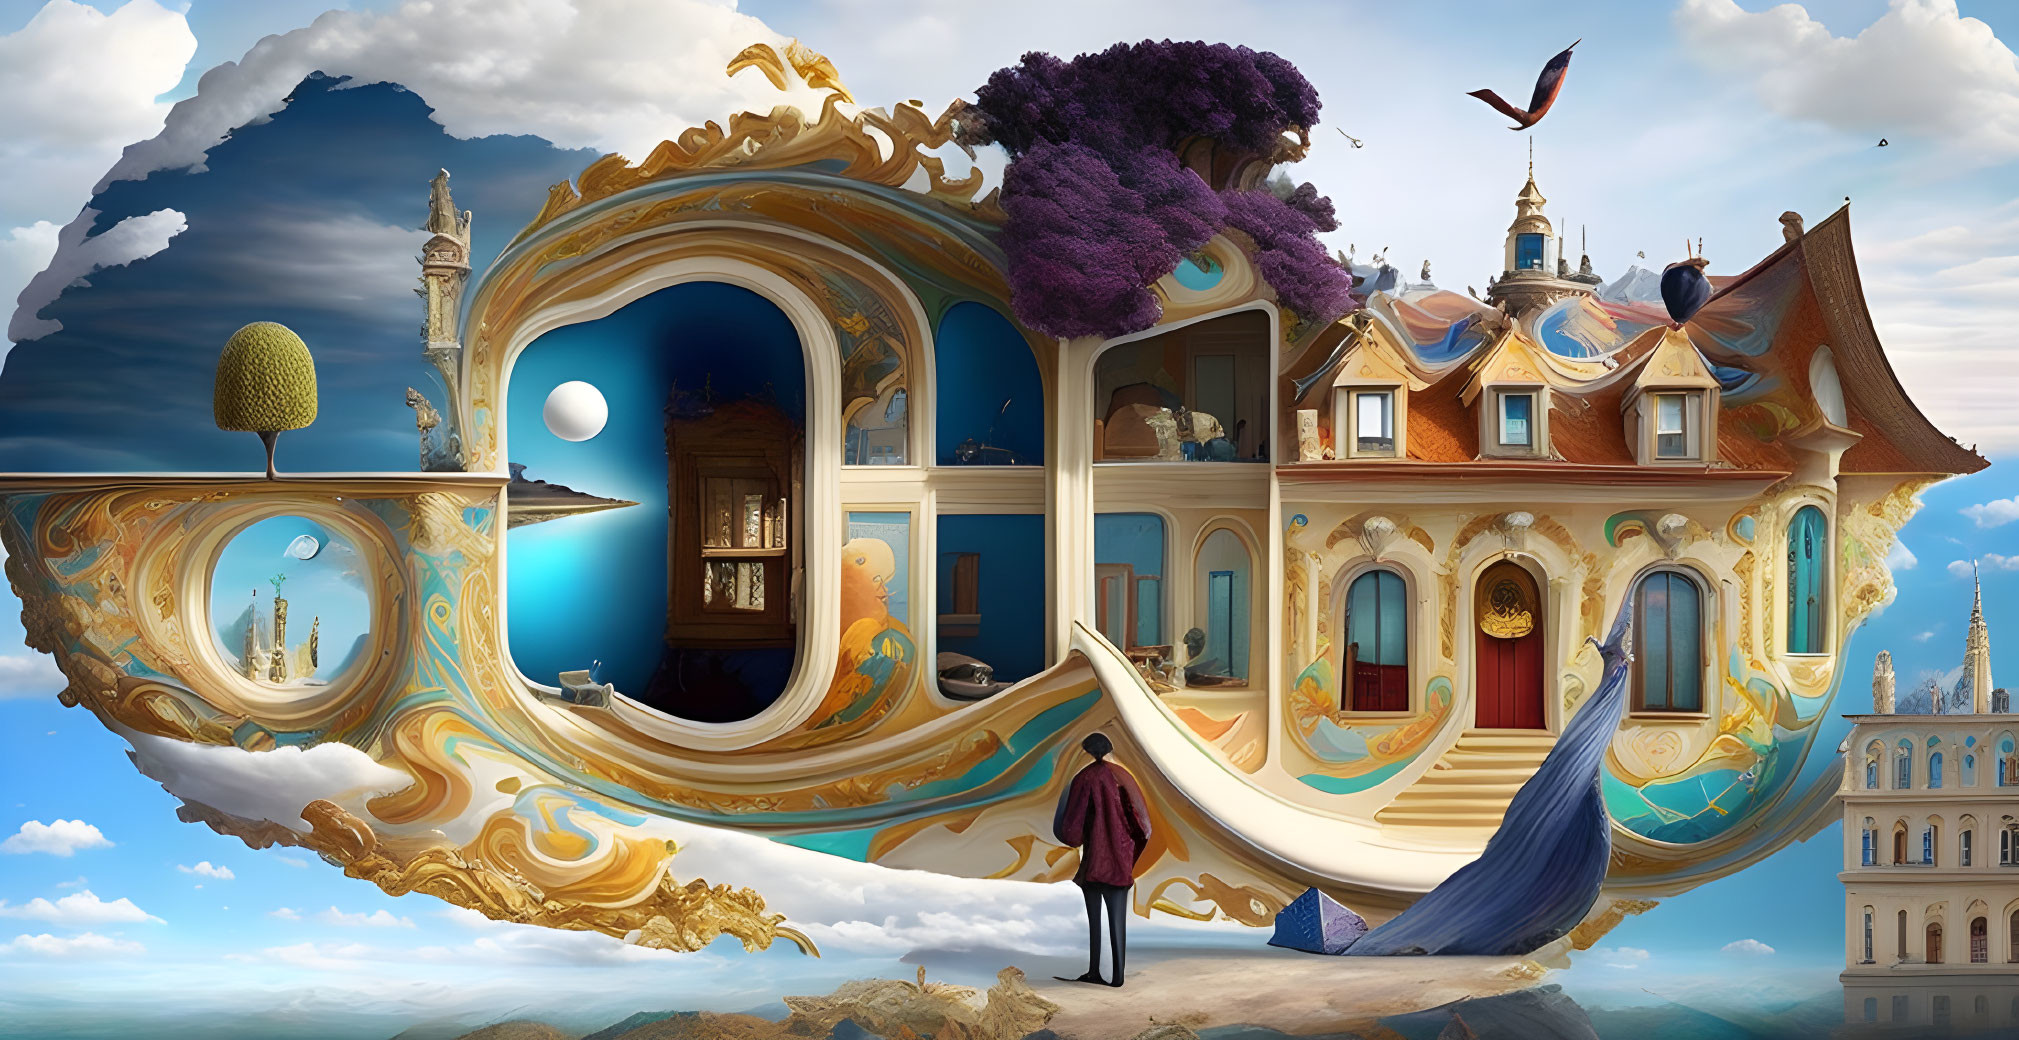 Surreal baroque-style building with peacock and figure in cloudy sky